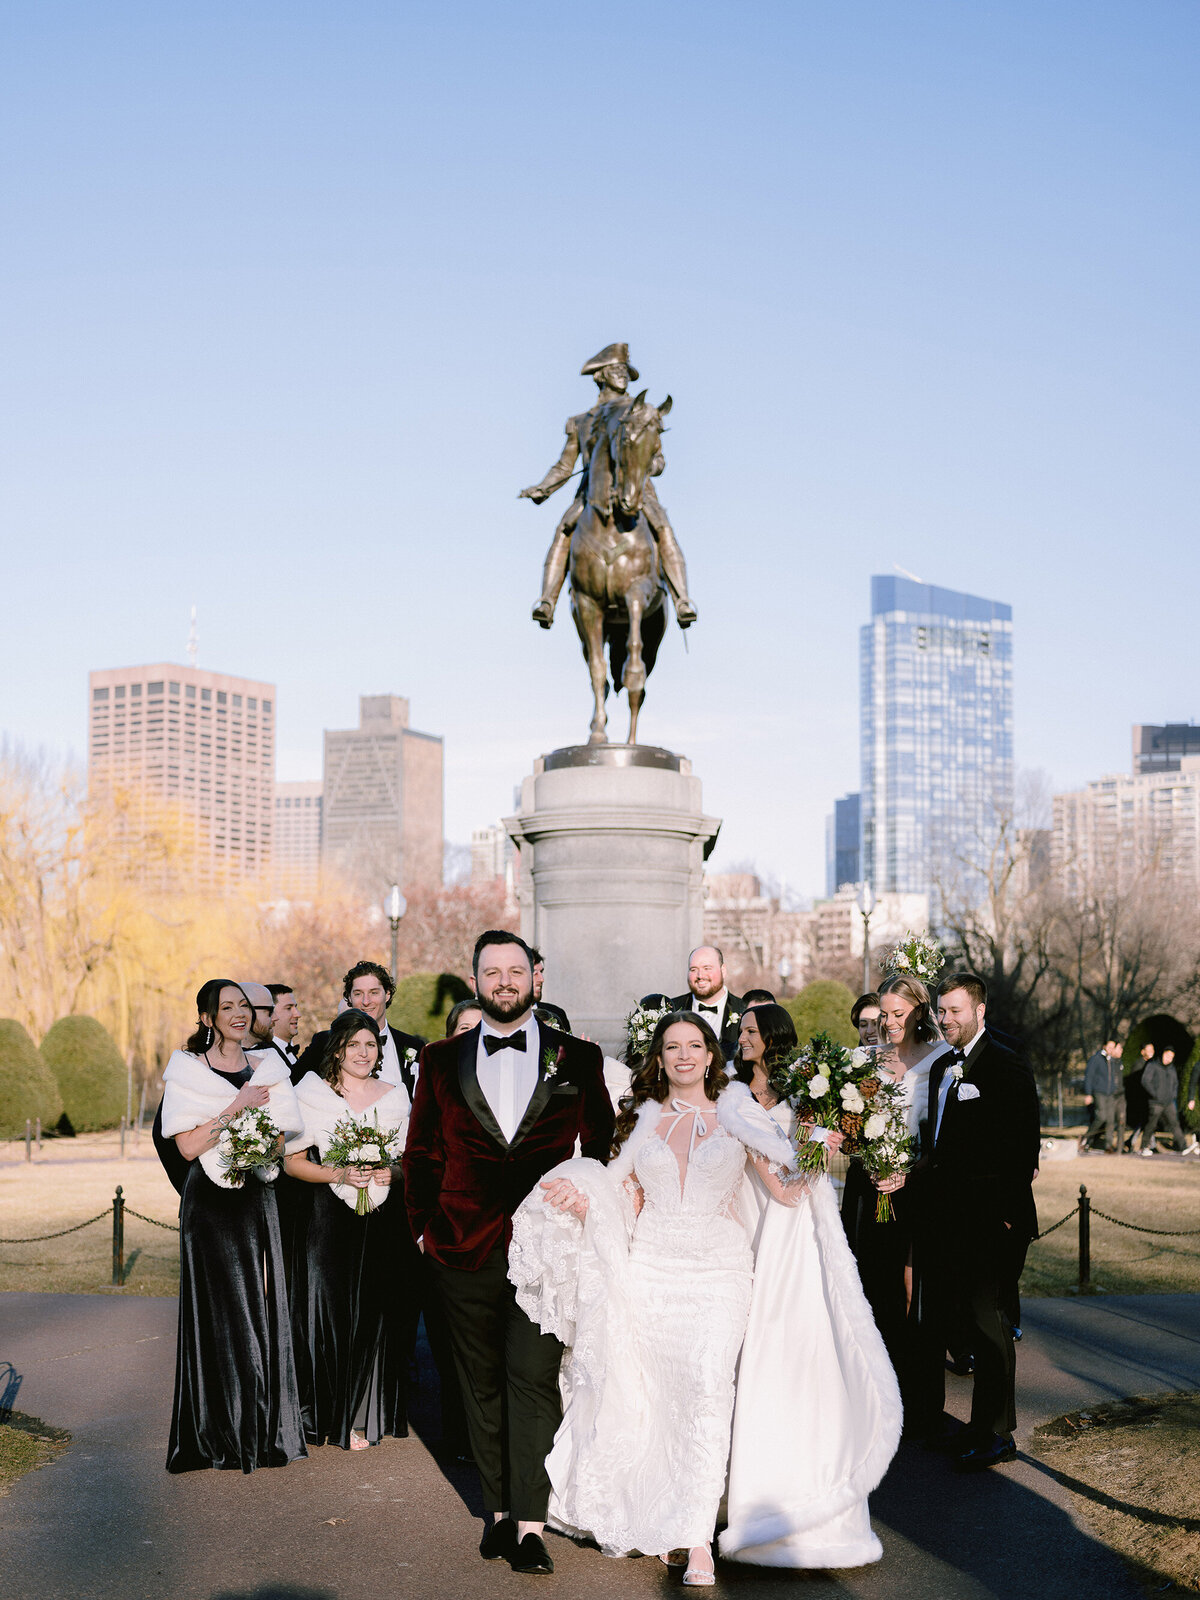 A wedding party in front of George Washington statue in the Boston Public Garden